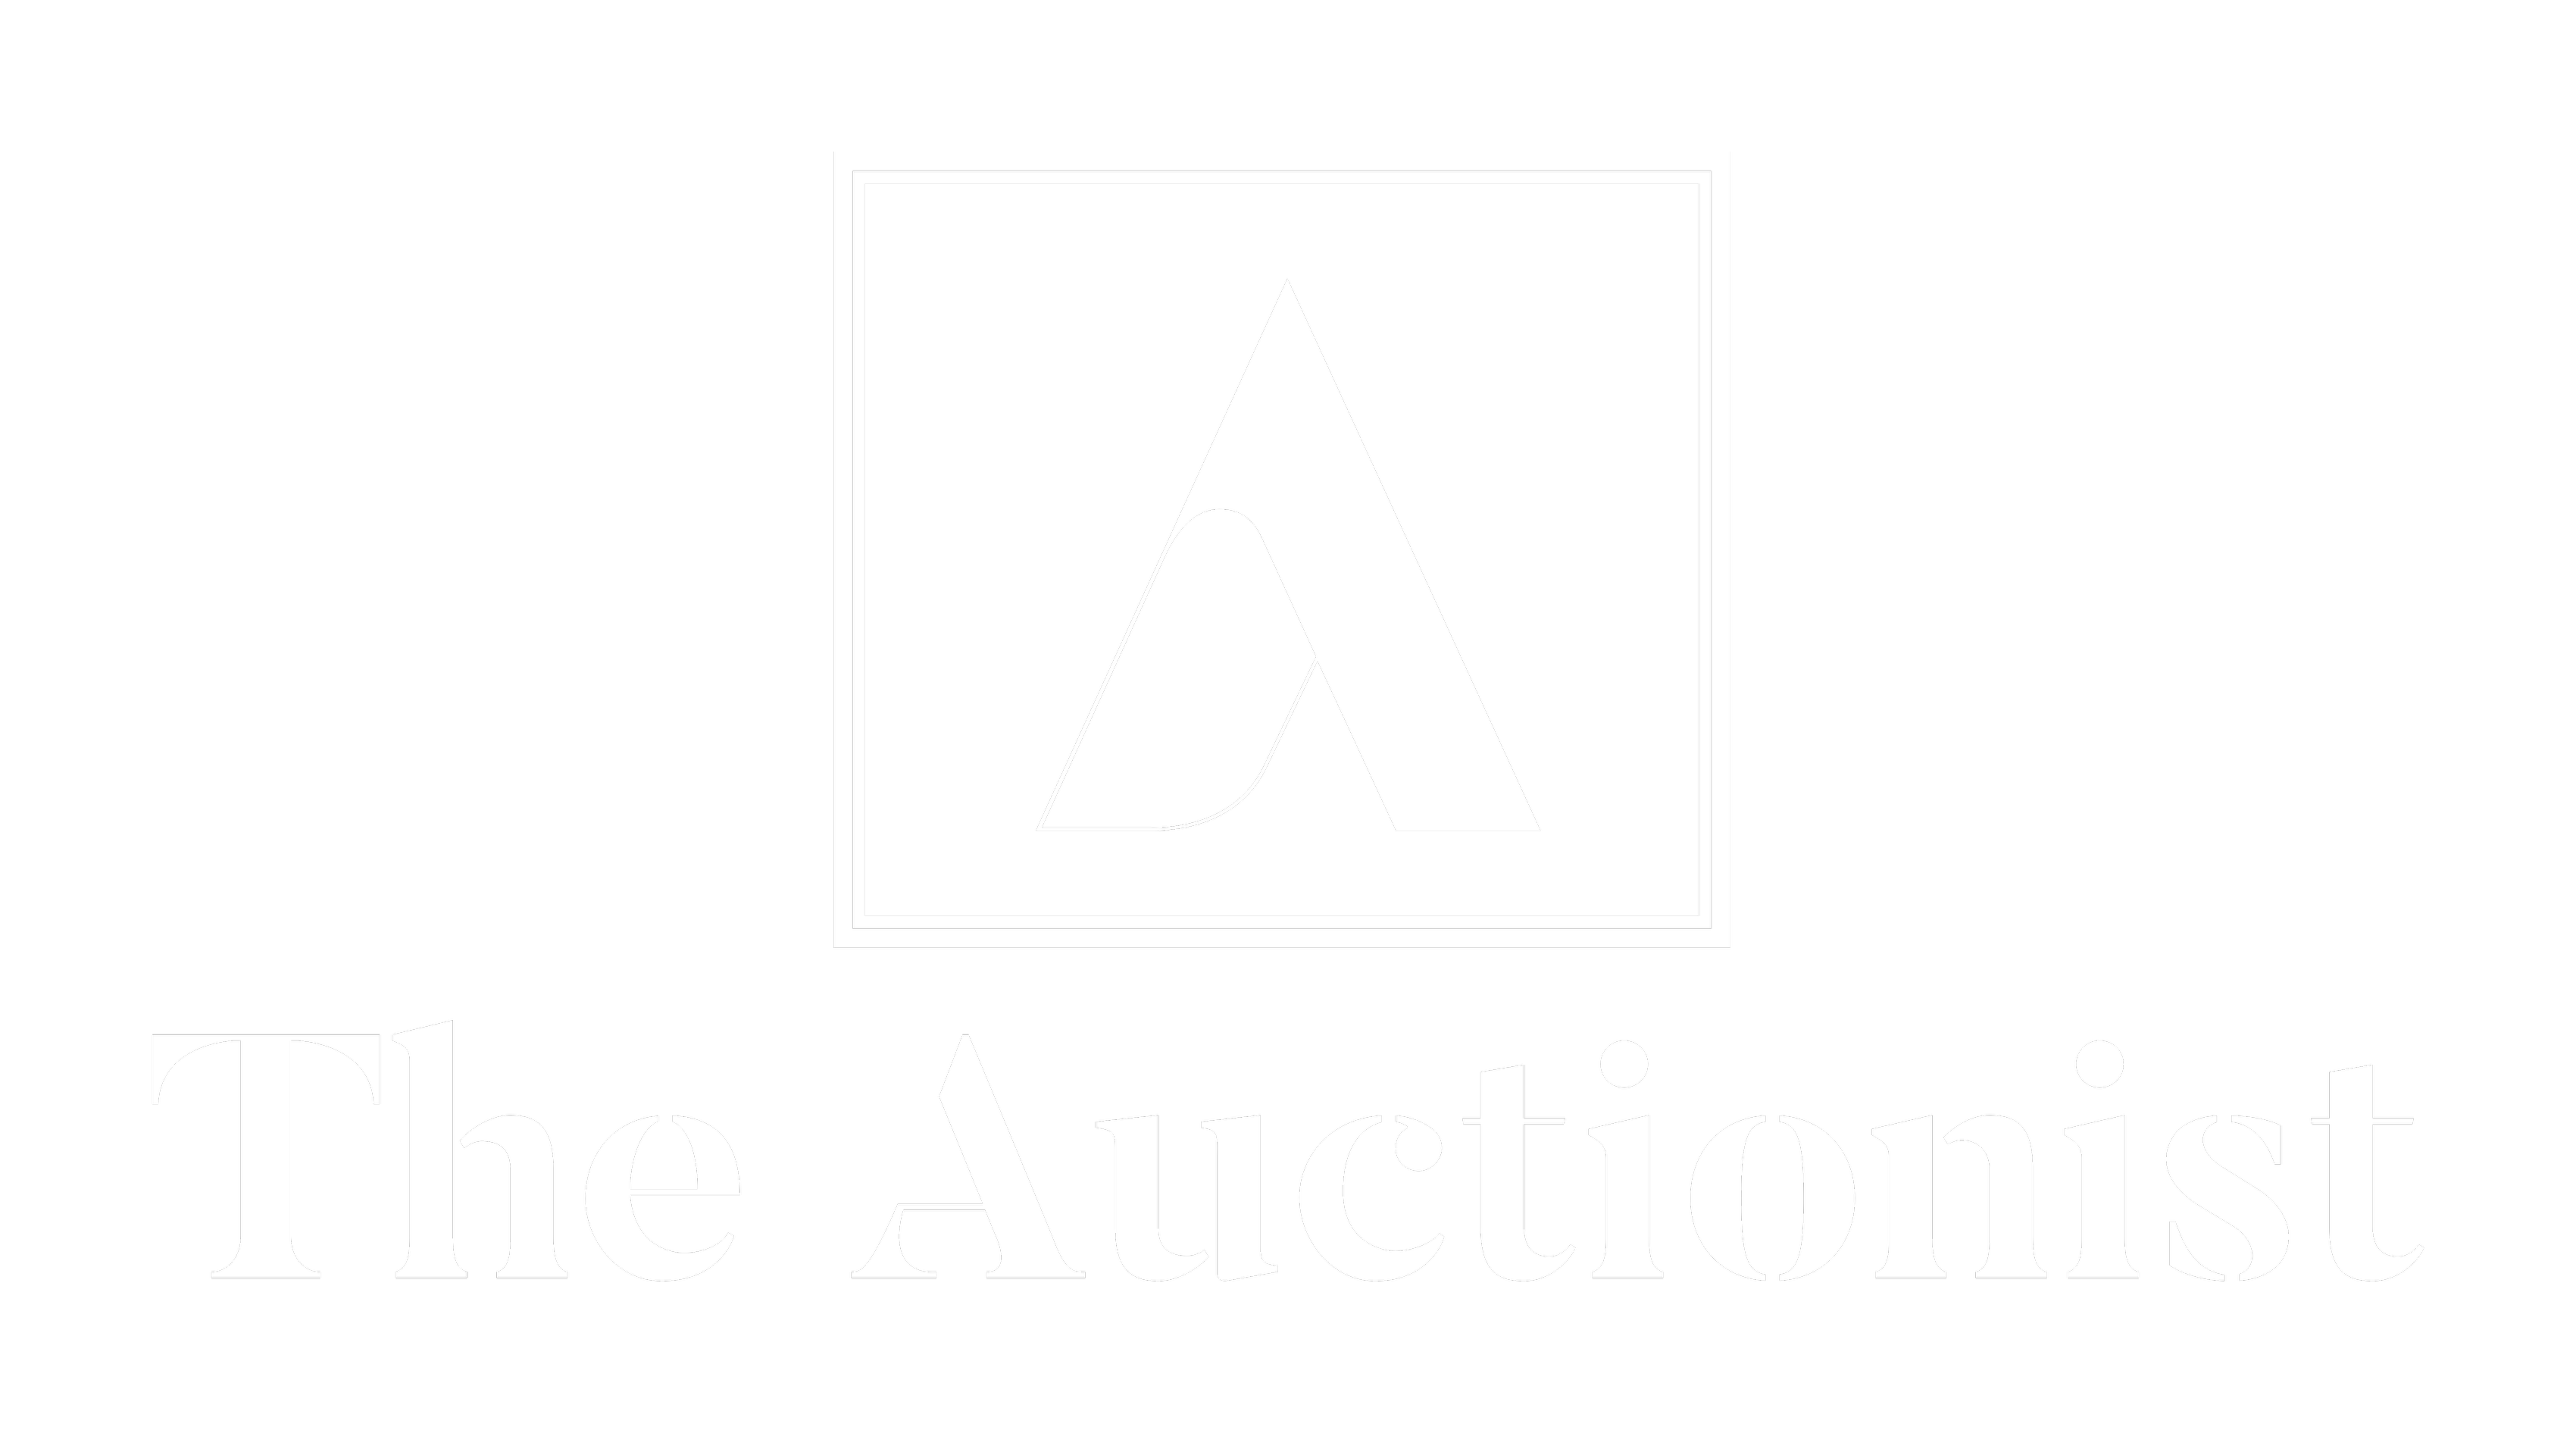 The Auctionist